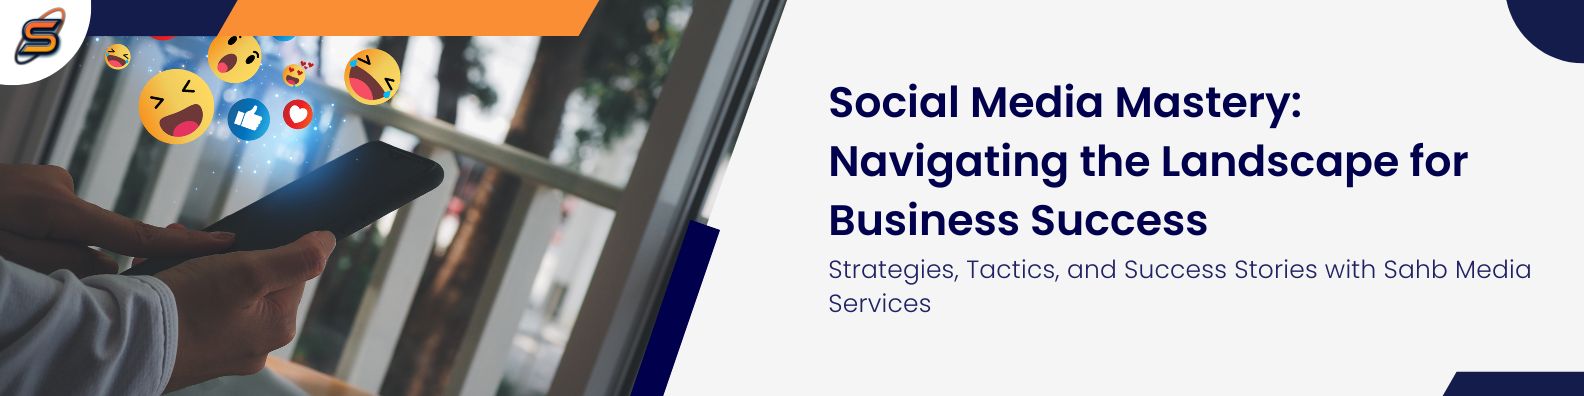 Social Media Mastery: Navigating the Landscape for Business Success